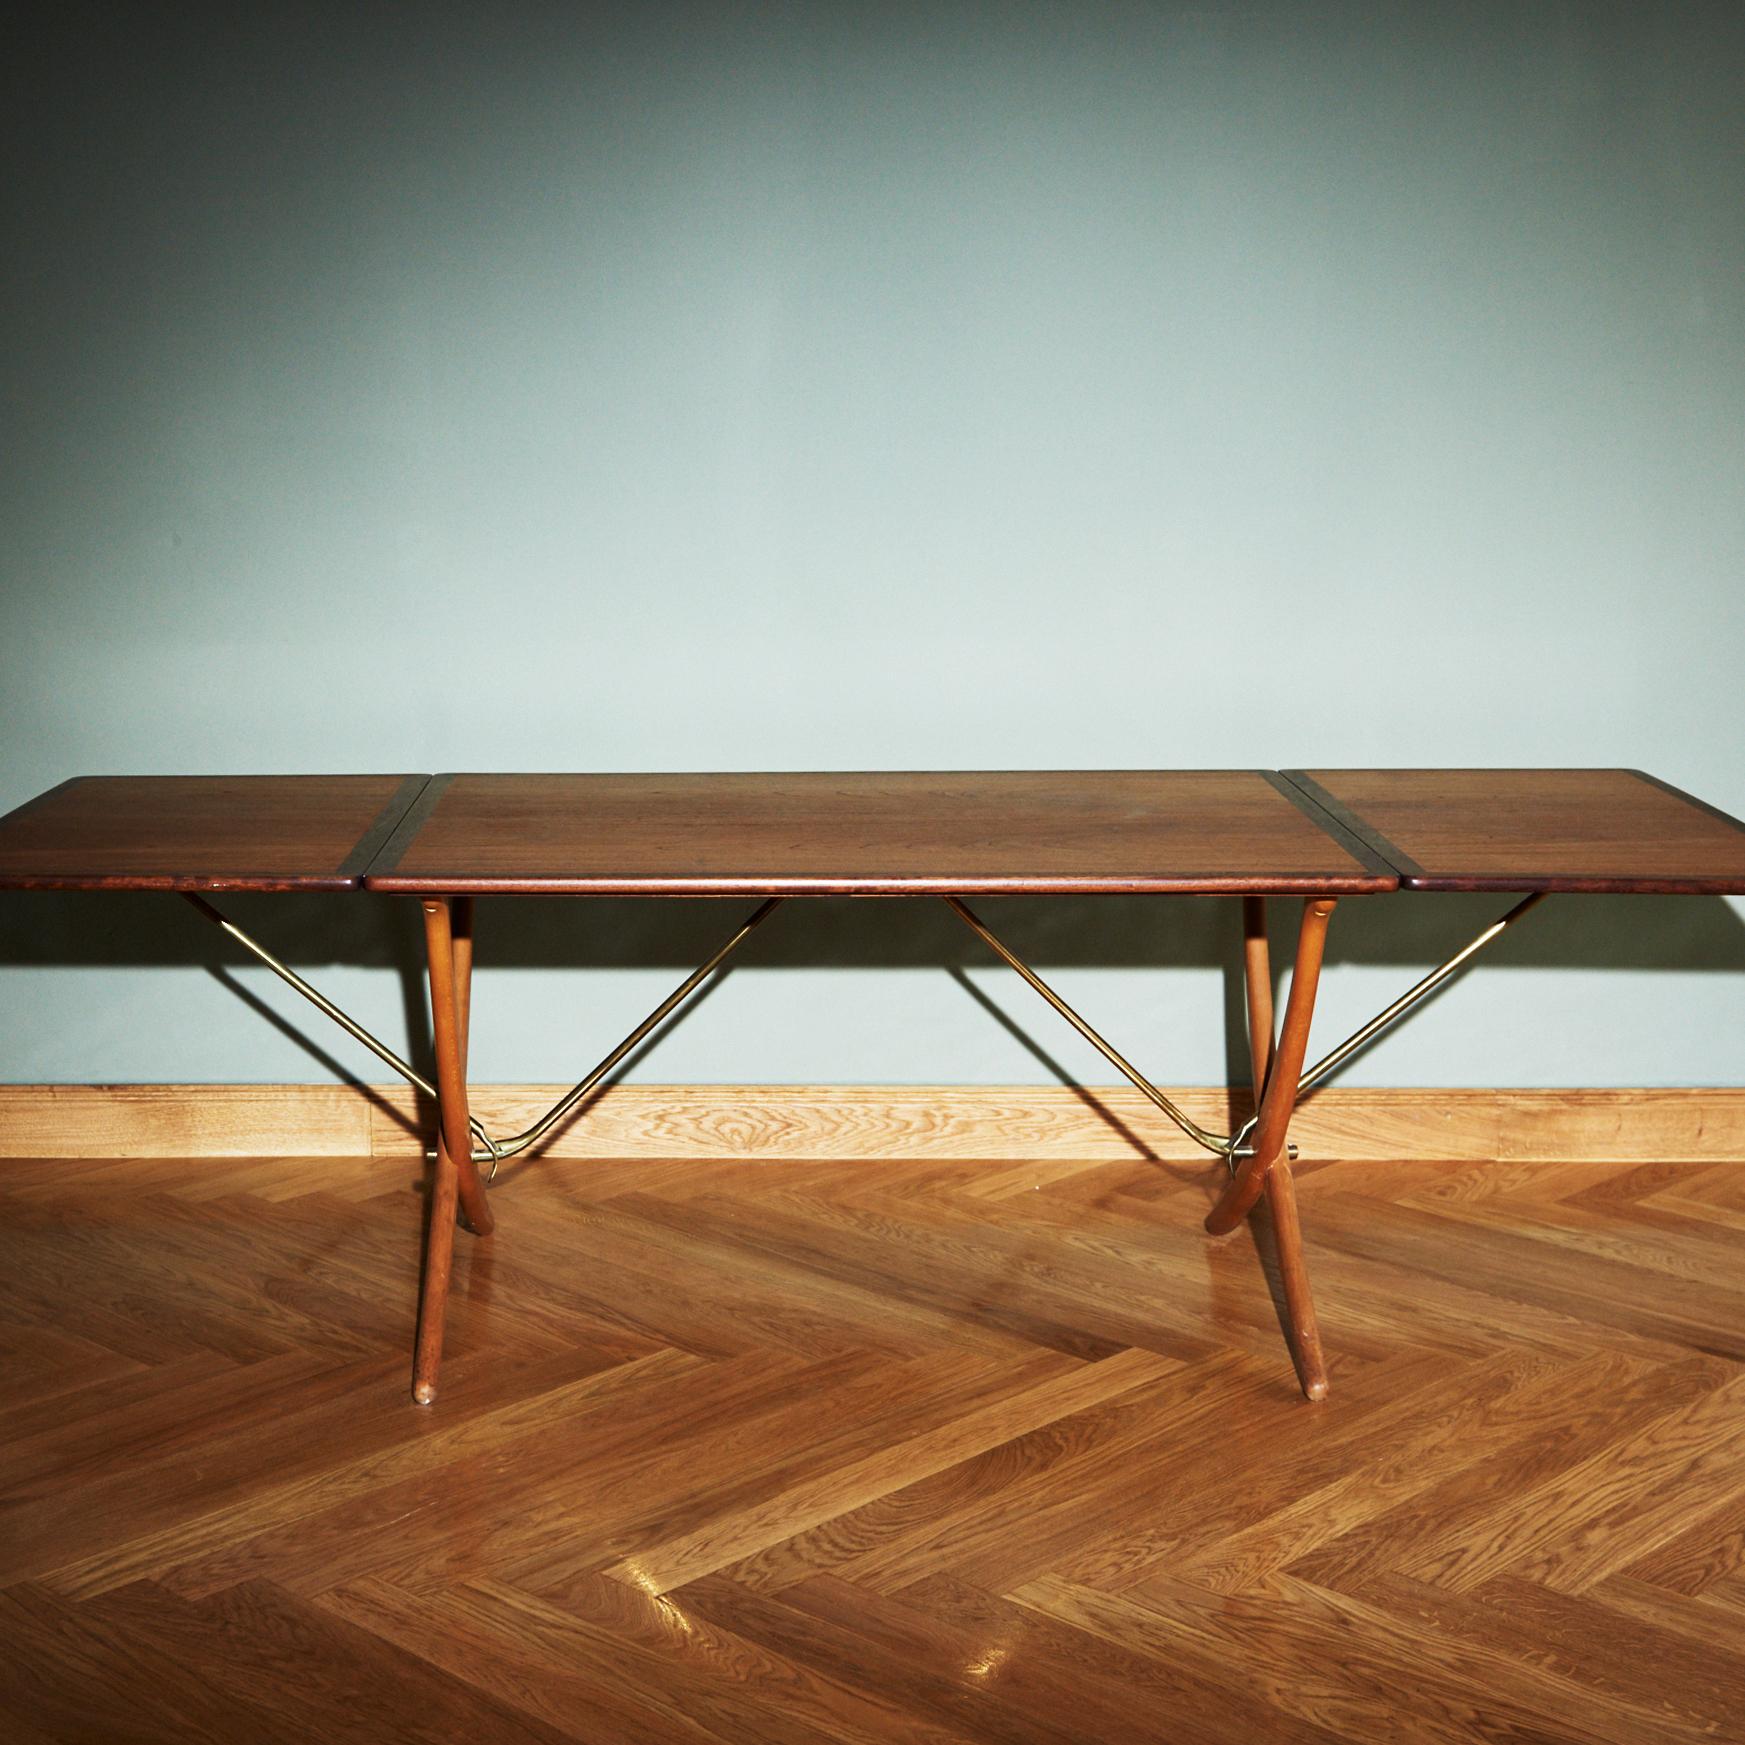 Dining table produced by Andreas Tuck with a rectangular teak top that can be extended to the sides and curved, crossed beech wood legs with brass joints.